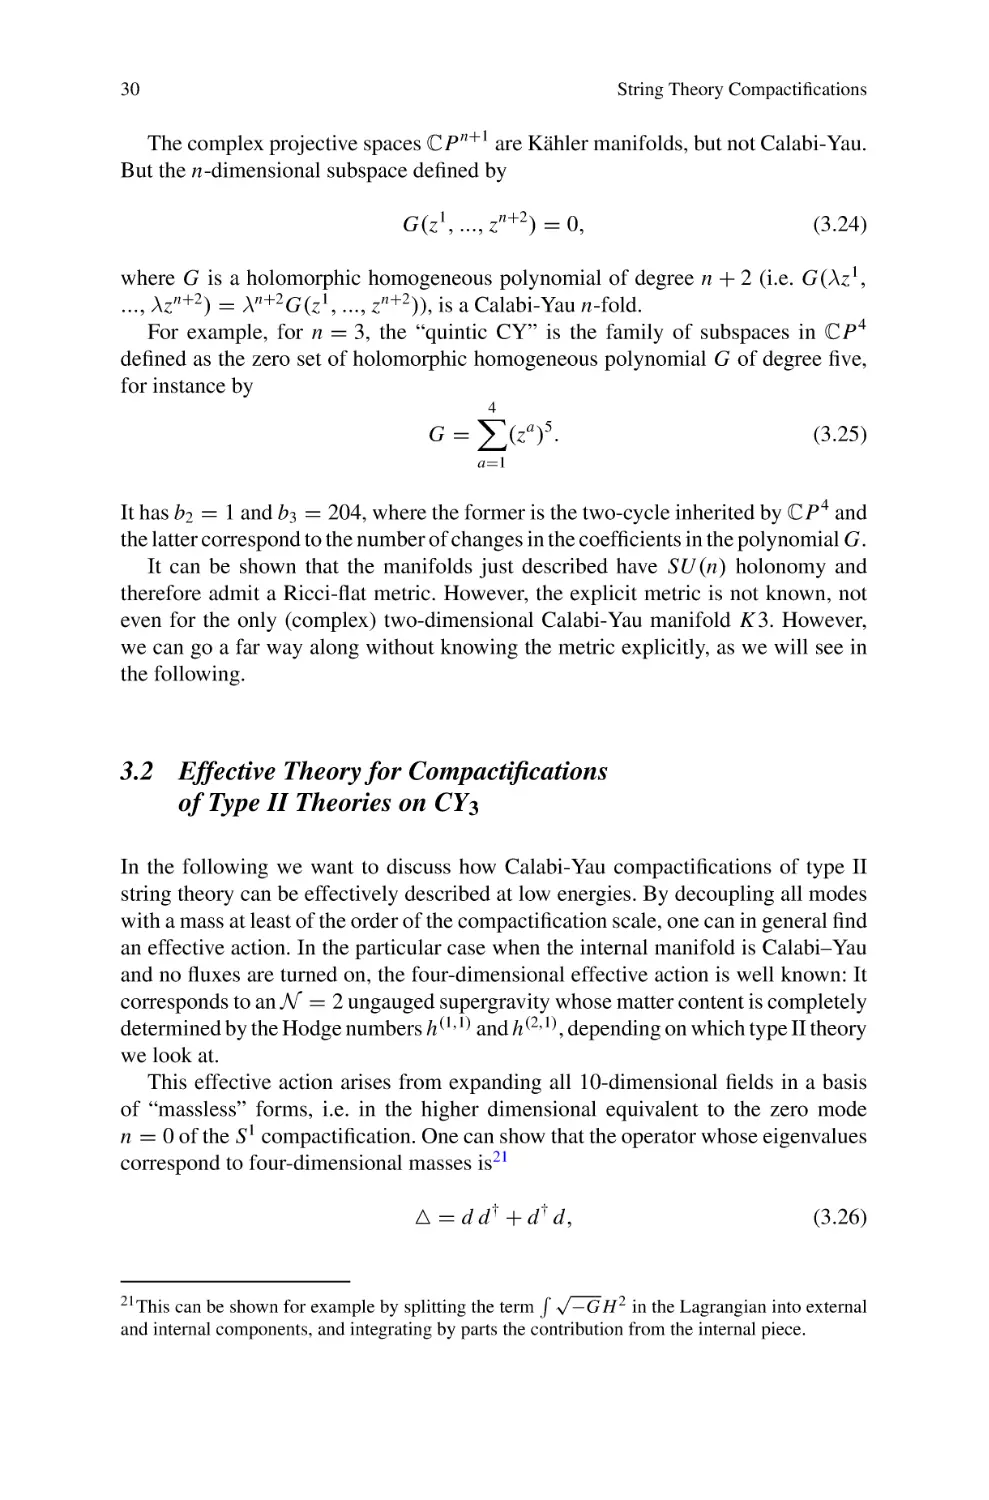 3.2 Effective Theory for Compactifications  of Type II Theories on CY3